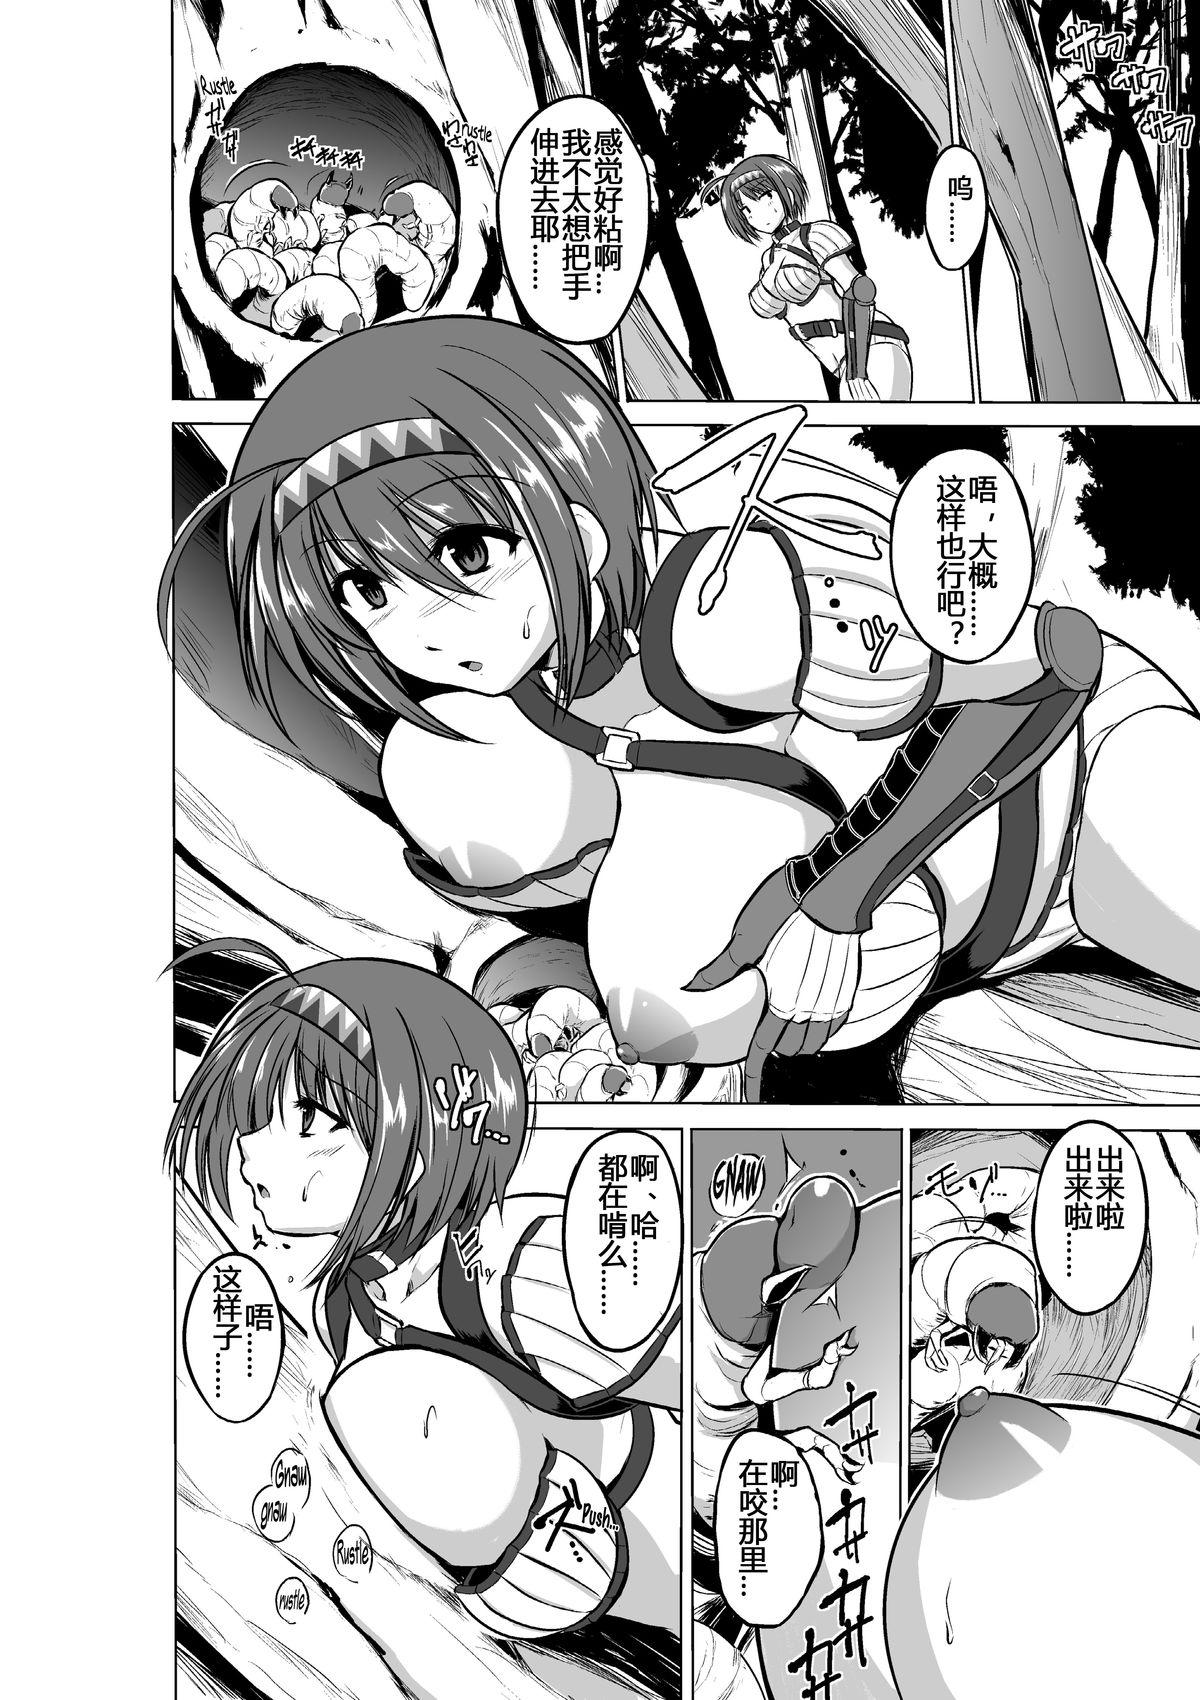 Crossdresser Dungeon Travelers - Chie no Himegoto - Toheart2 Homosexual - Page 6